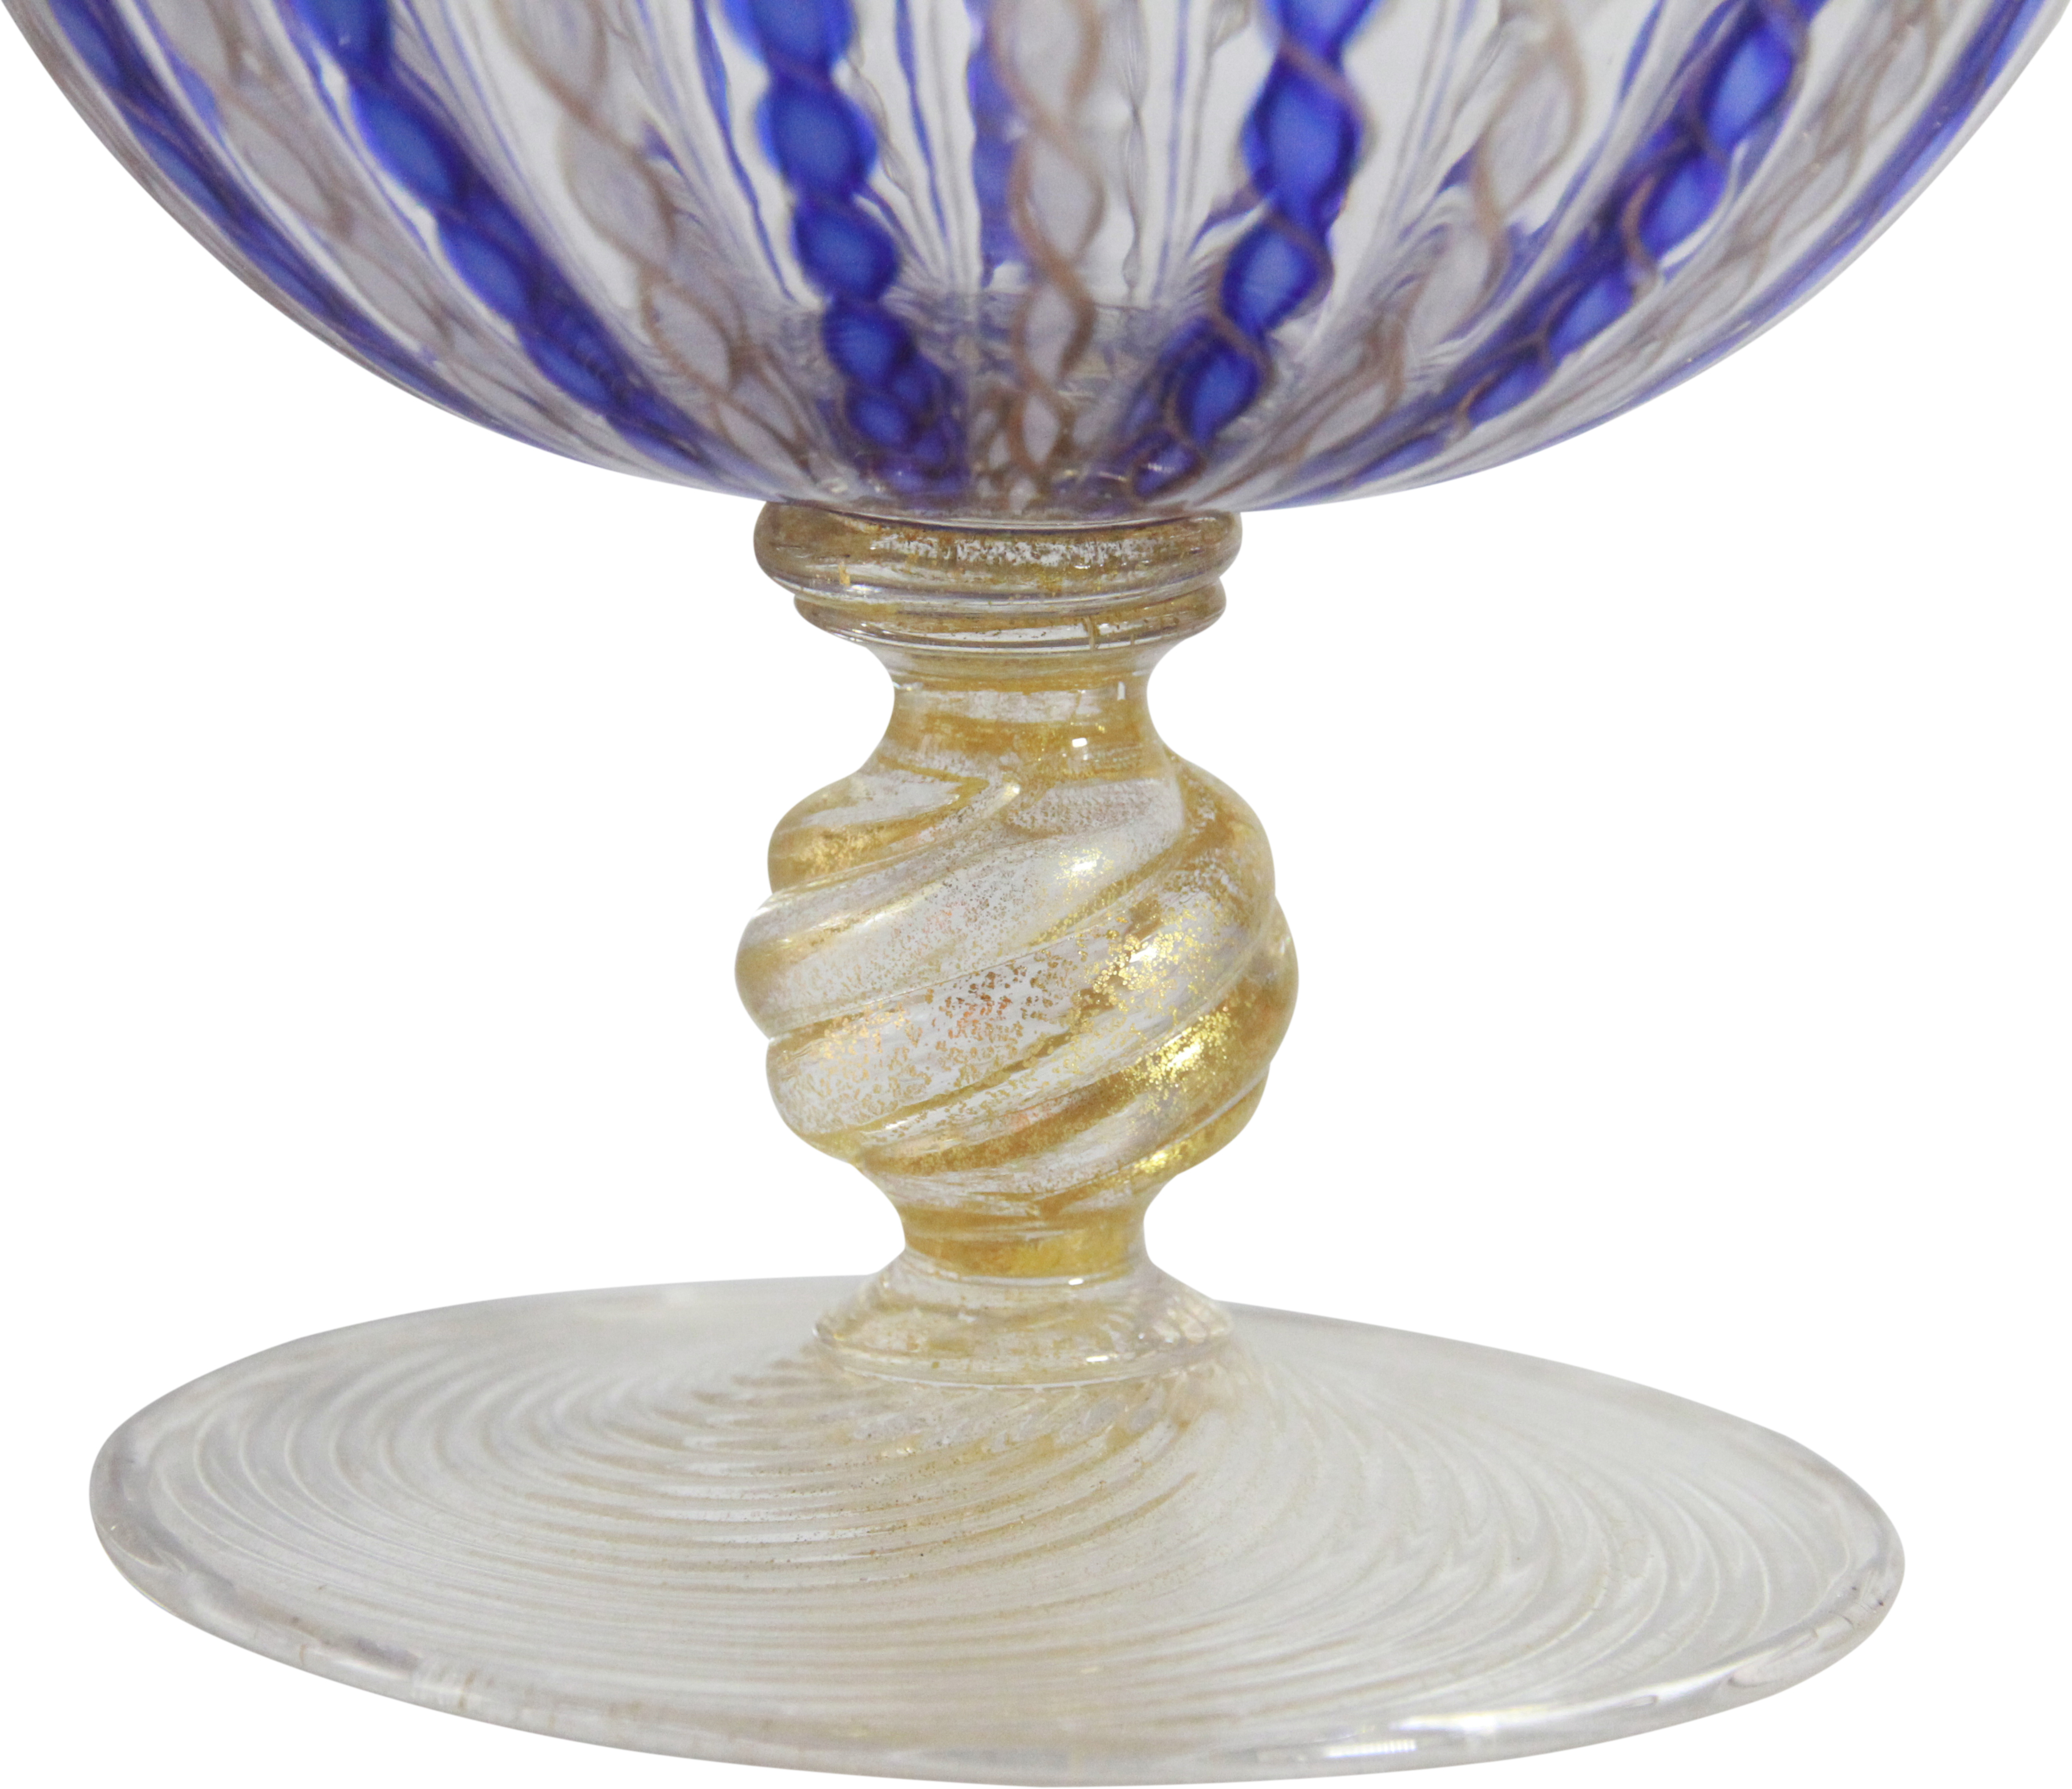 A Venetian suite of decorative desert, bowls & urns decorated in blue & gilt, 15 pieces total, - Image 3 of 12